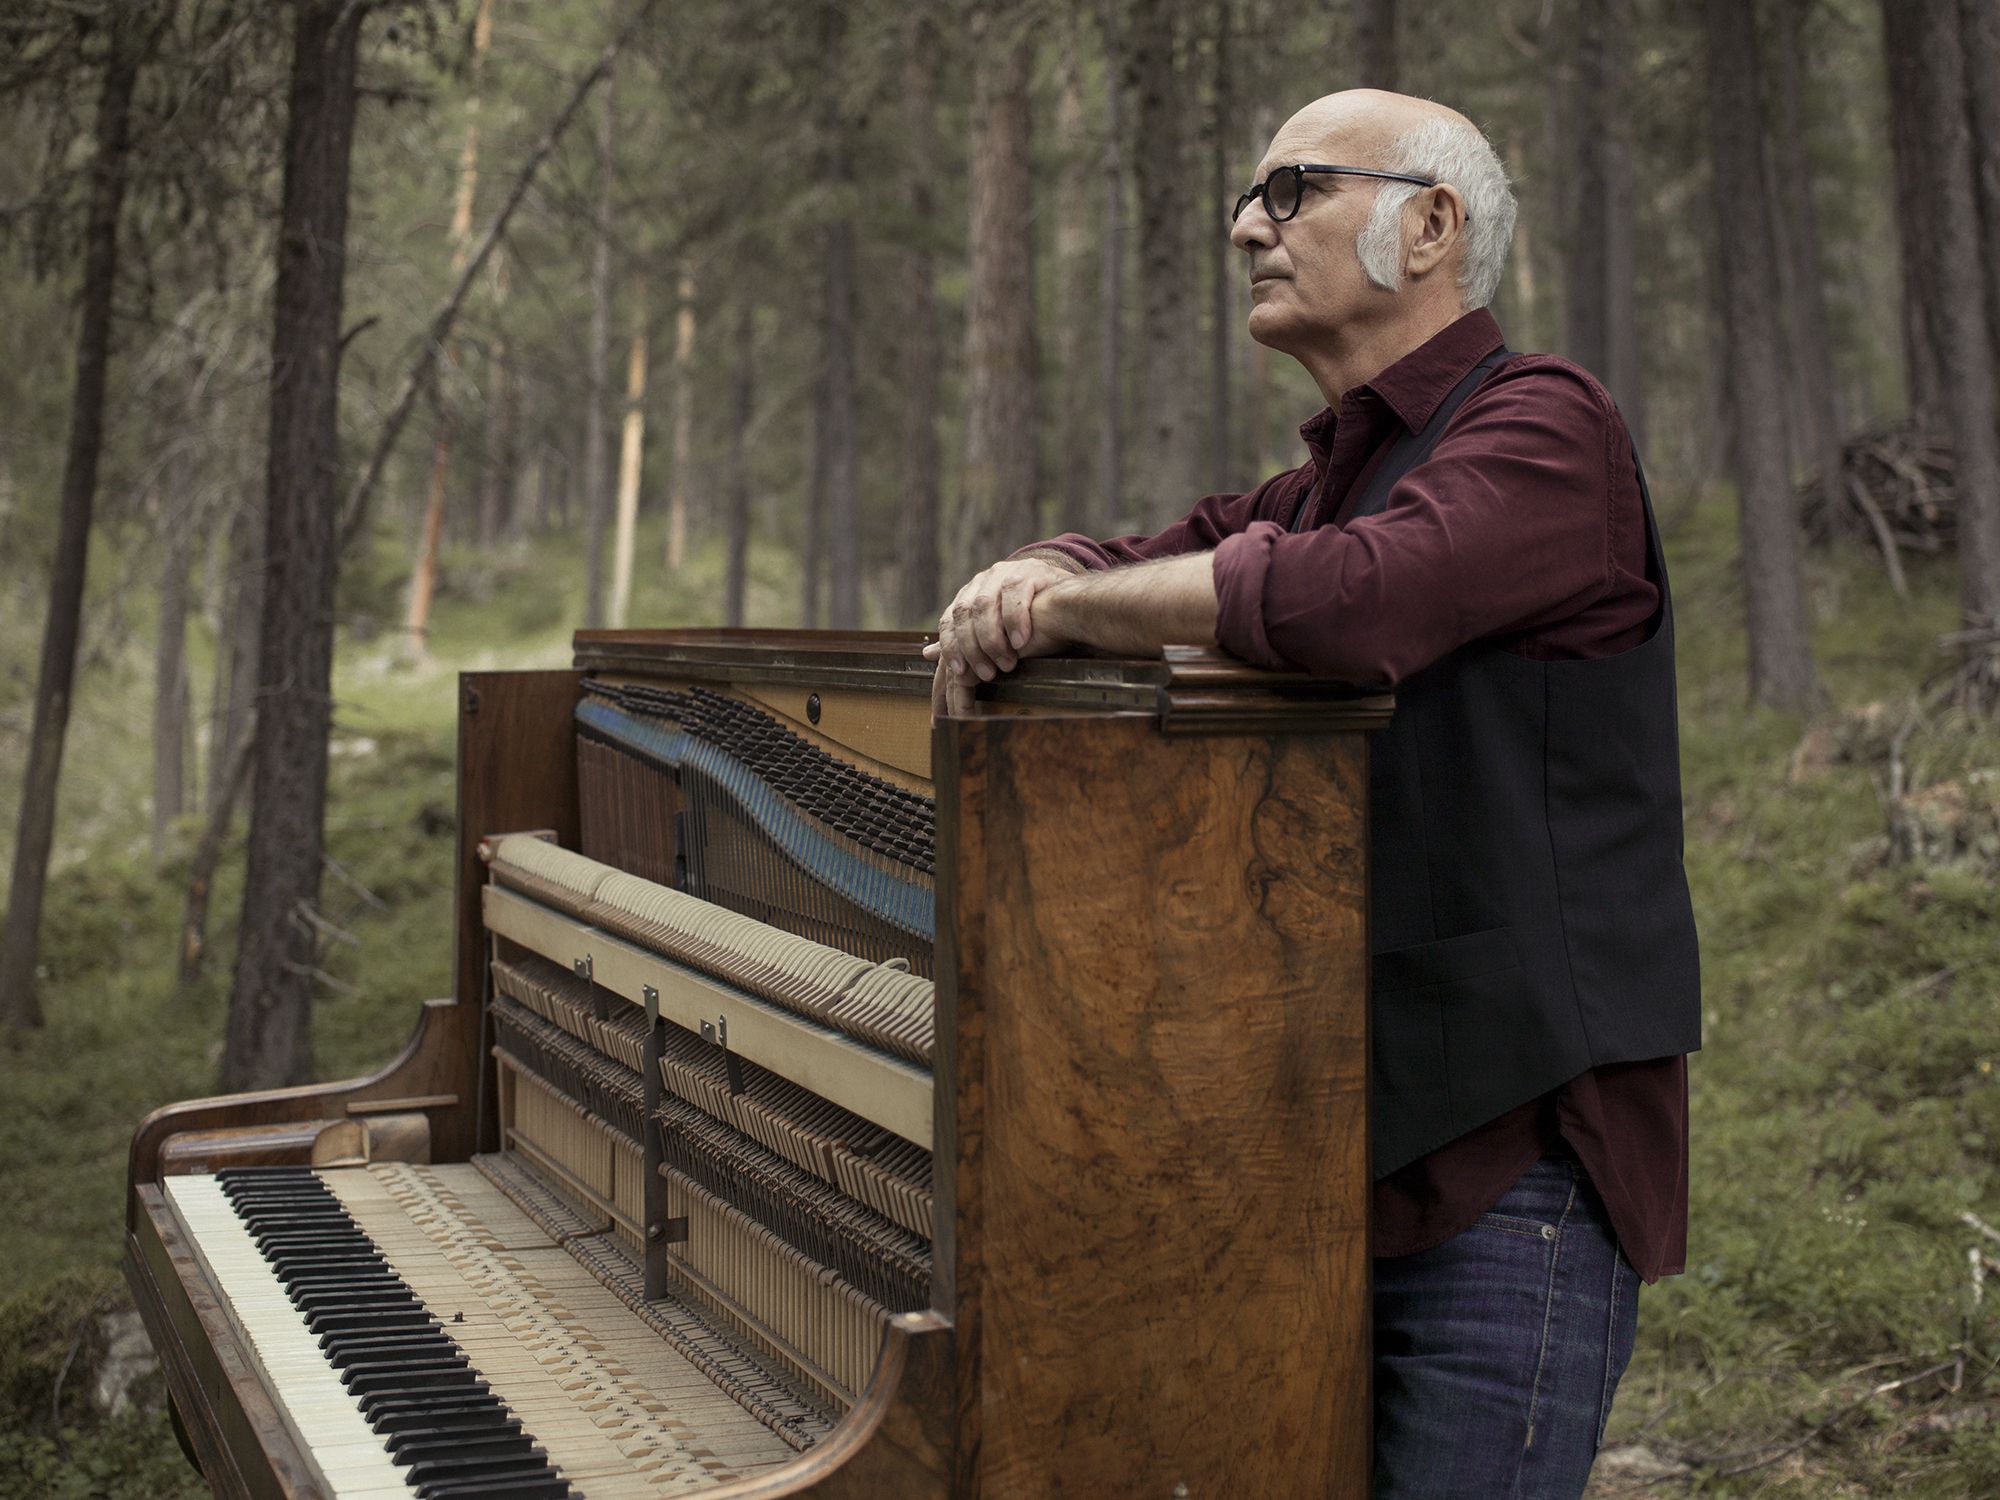 What I learnt from Ludovico Einaudi